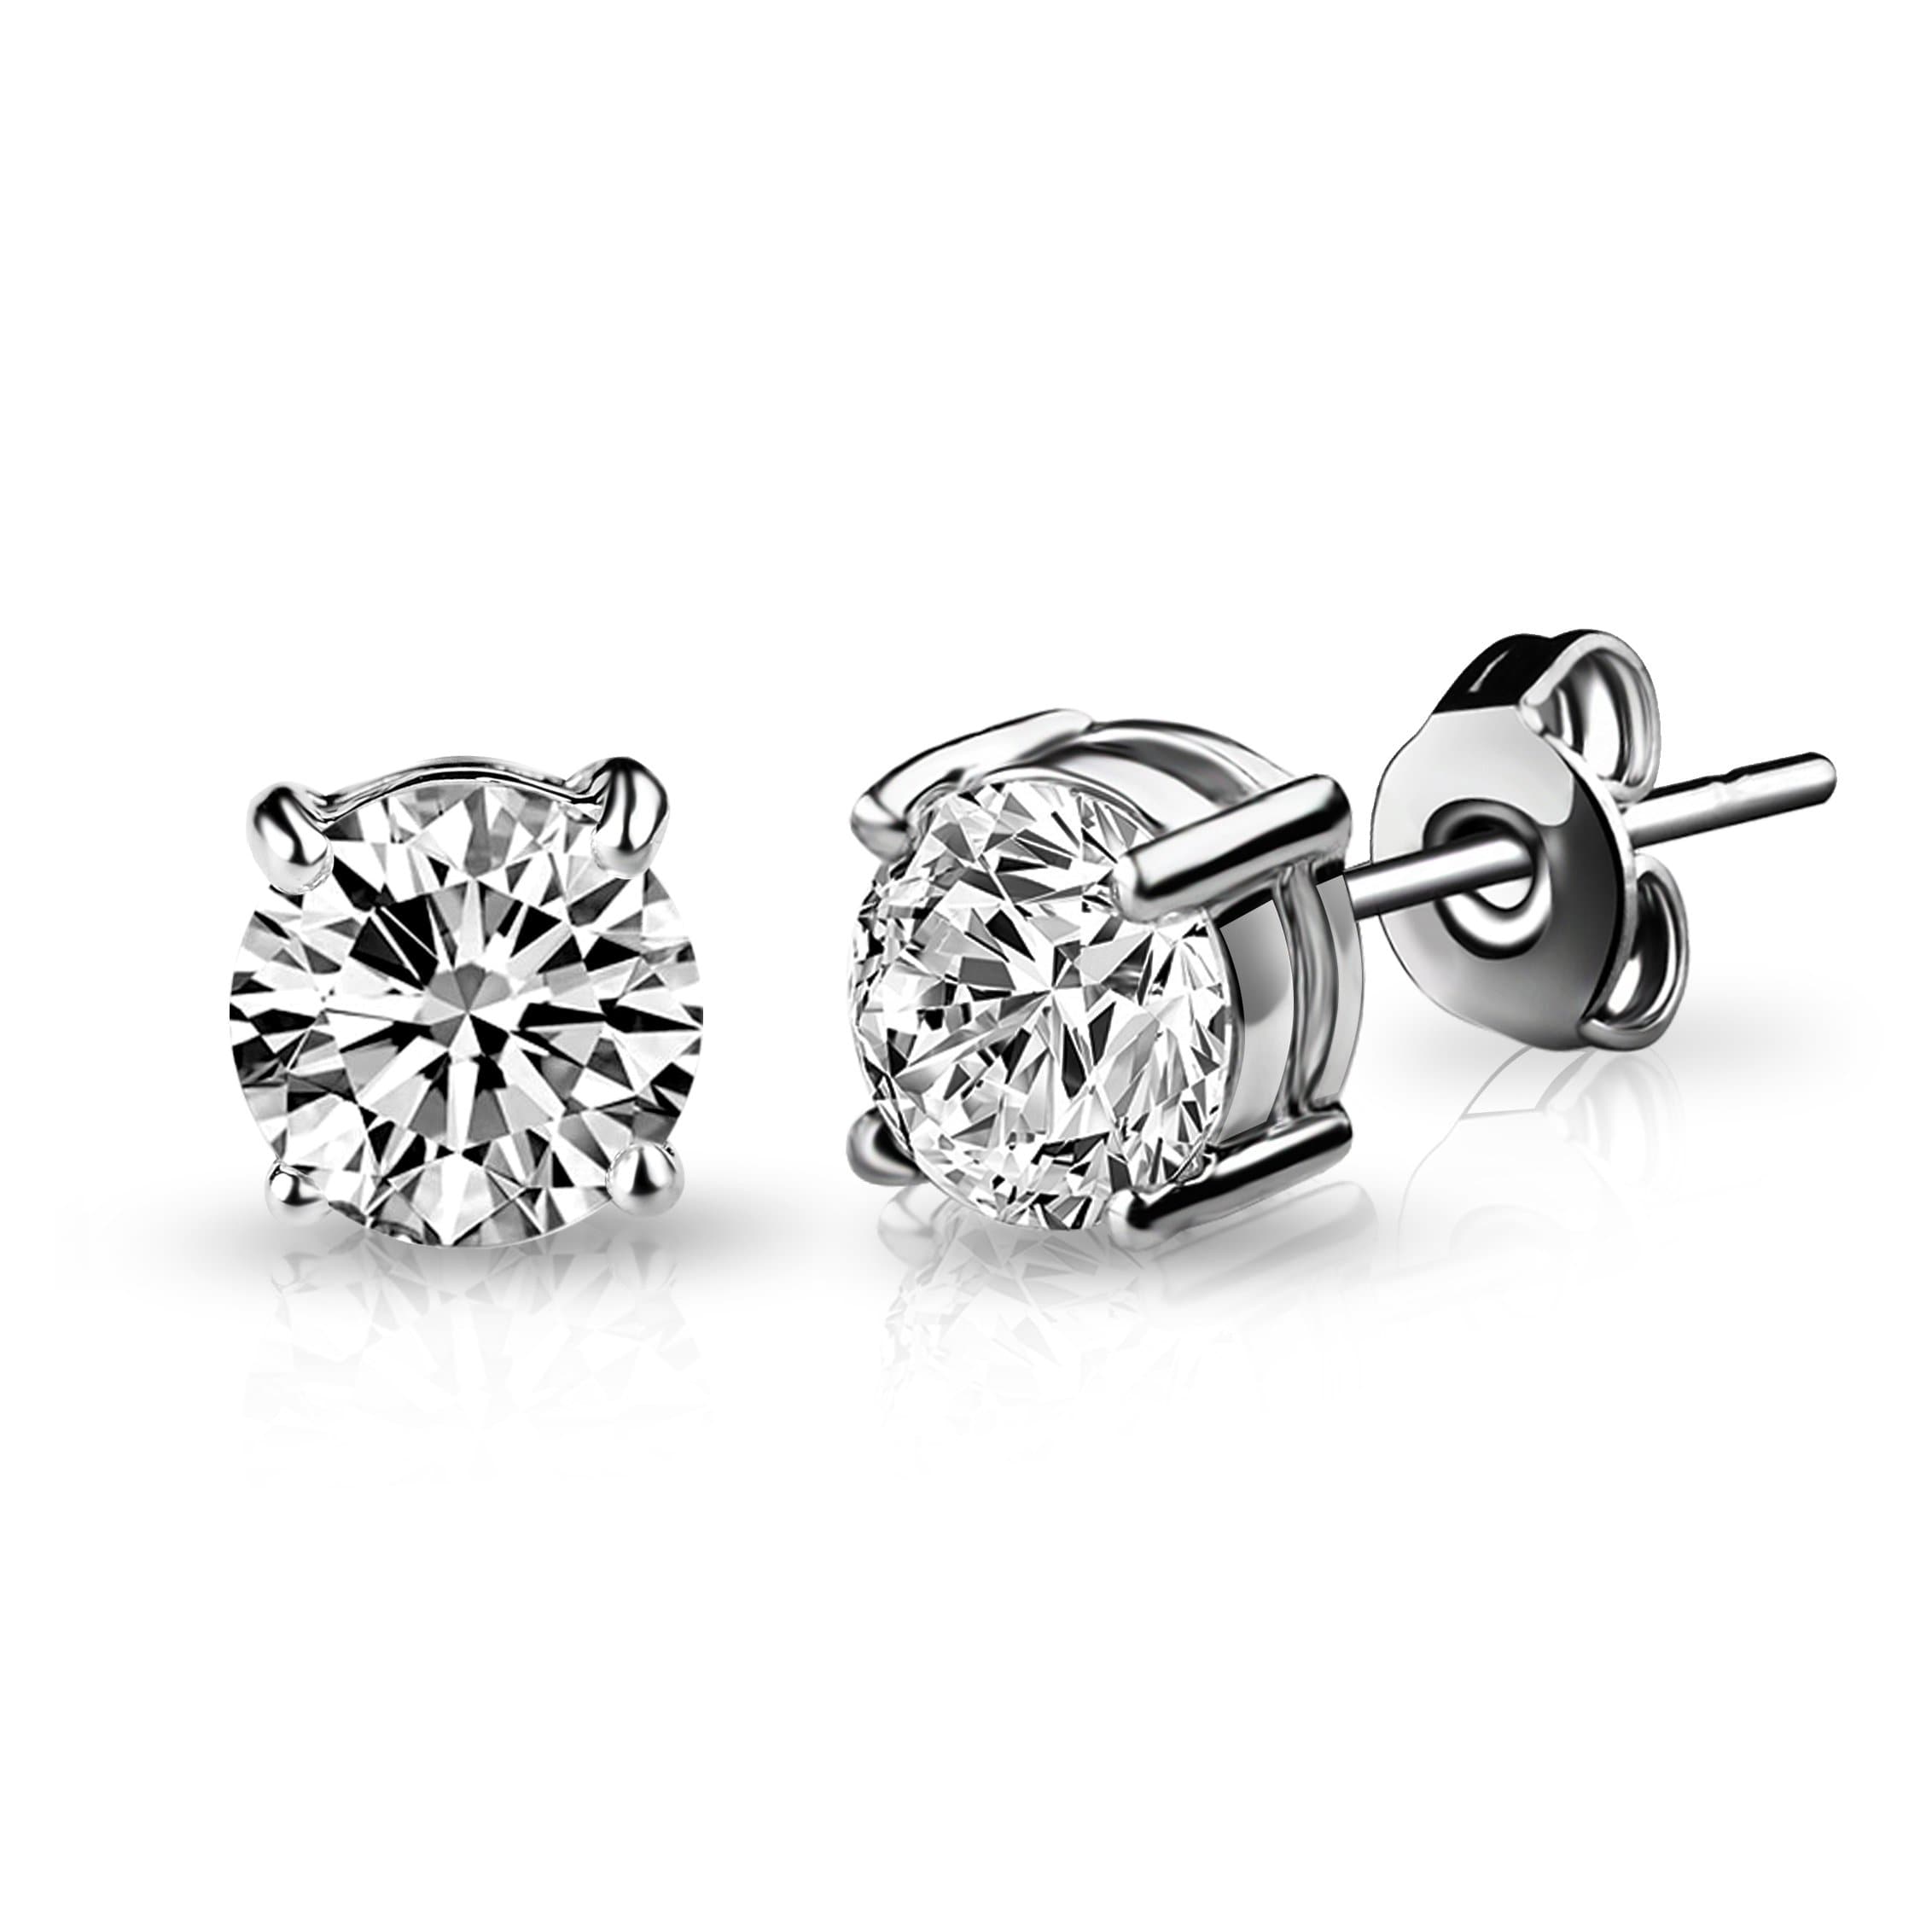 Silver Plated Solitaire Crystal Stud Earrings Created with Zircondia® Crystals